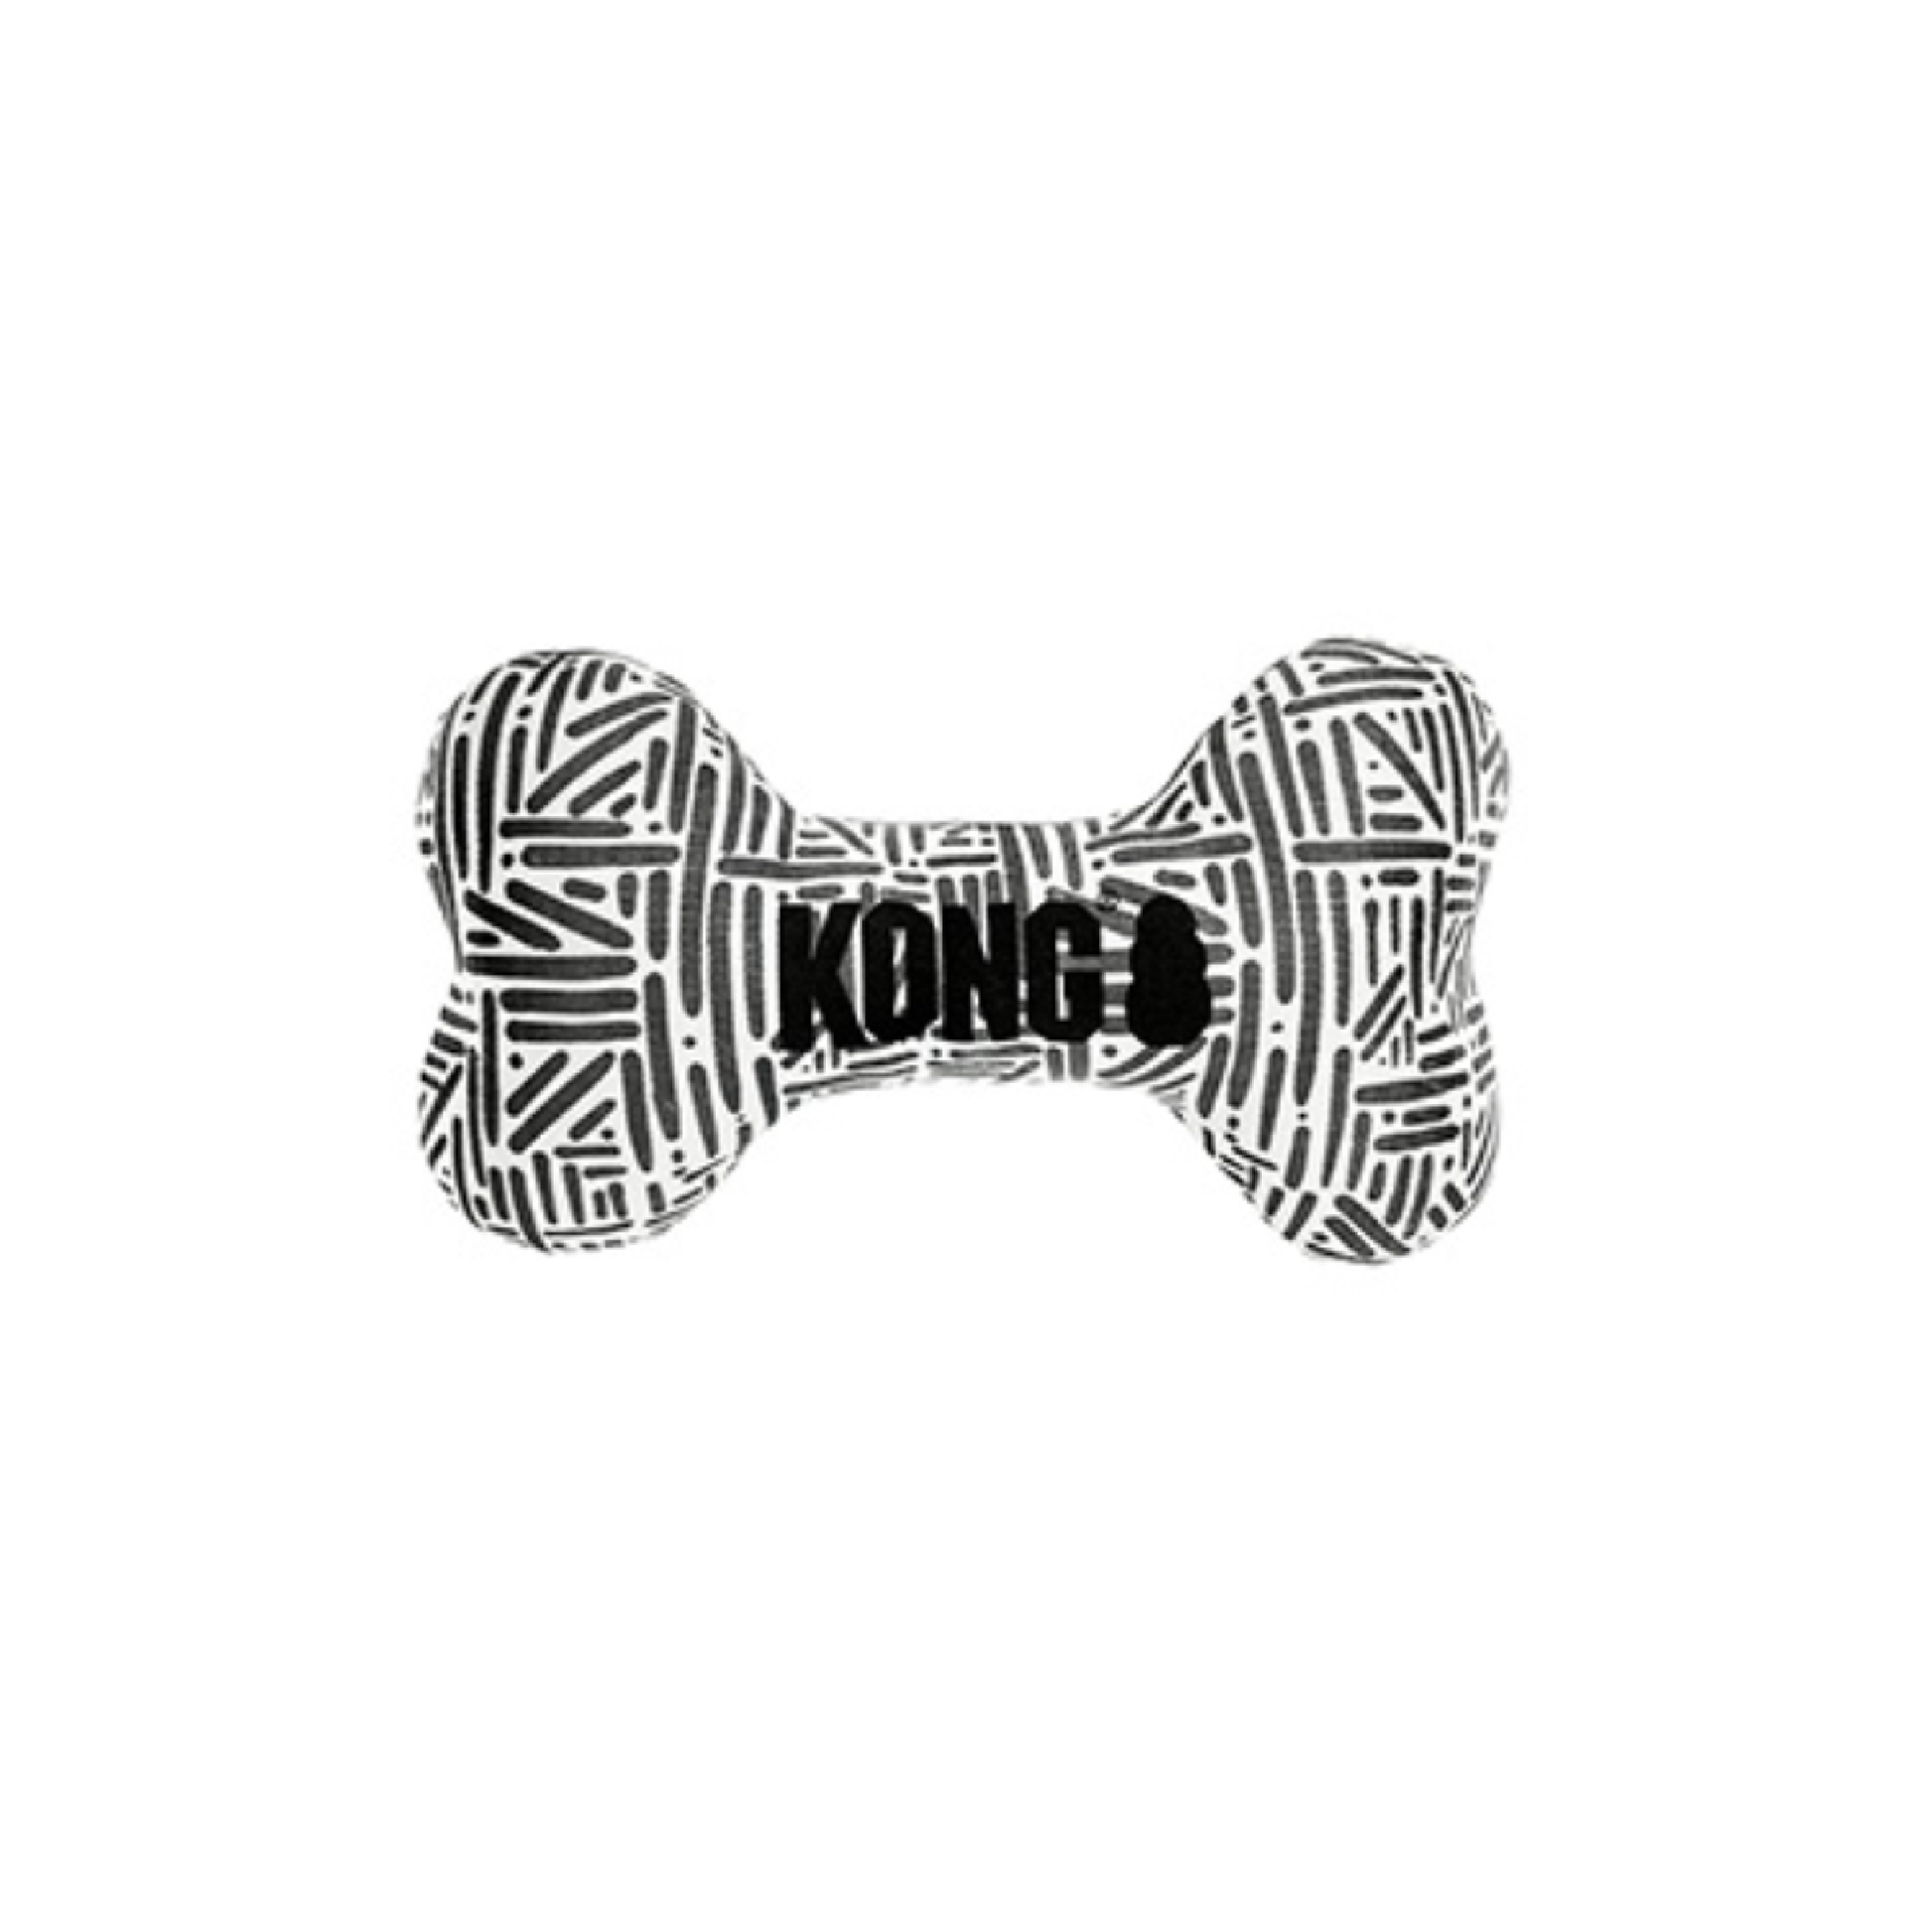 Kong Maxx Bone toy for dogs.